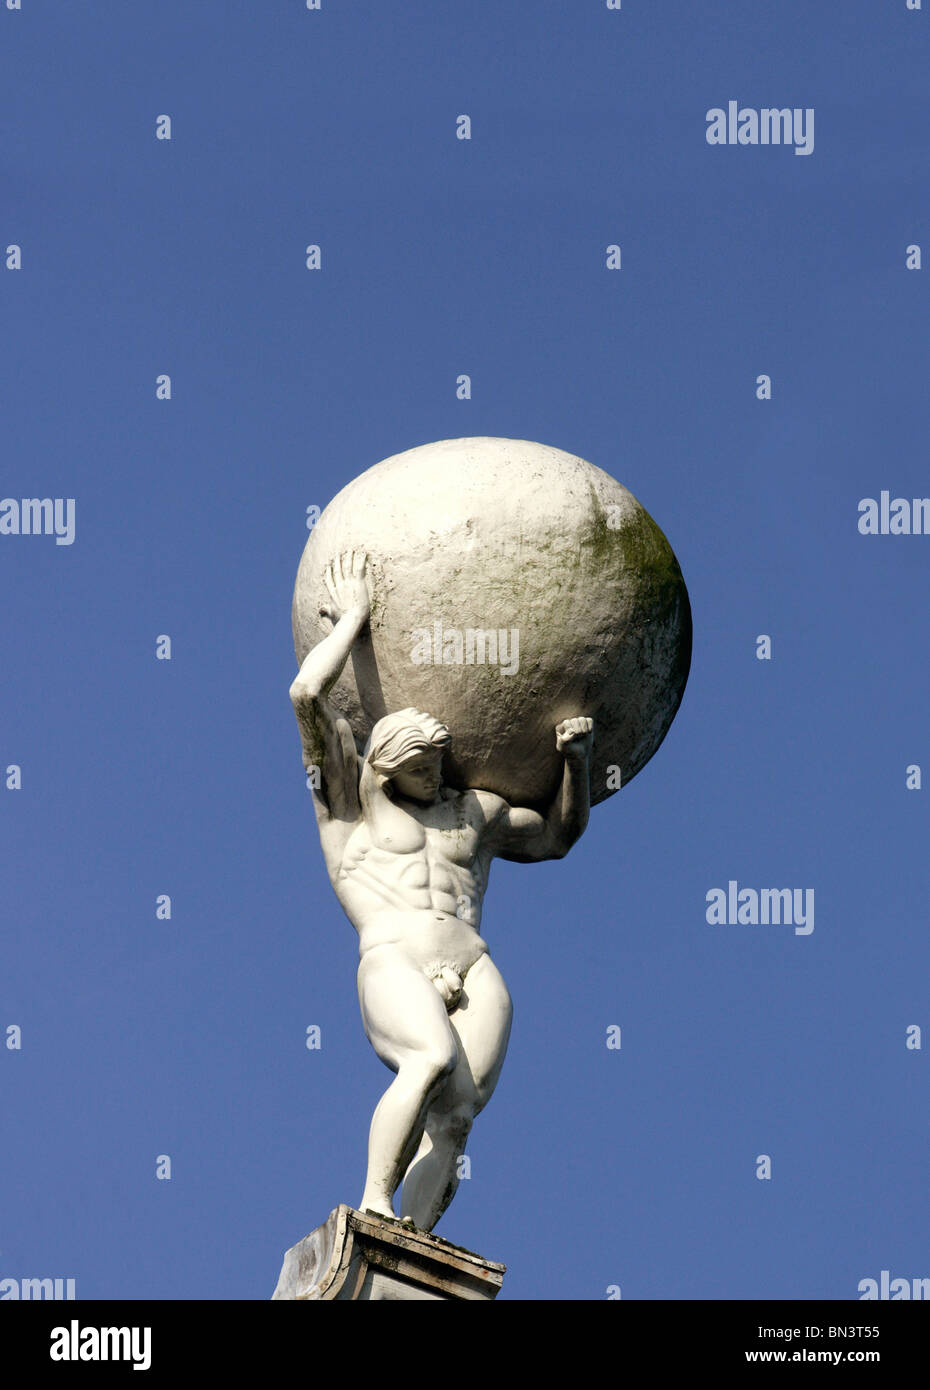 Low angle view of statue of man carrying globe Stock Photo